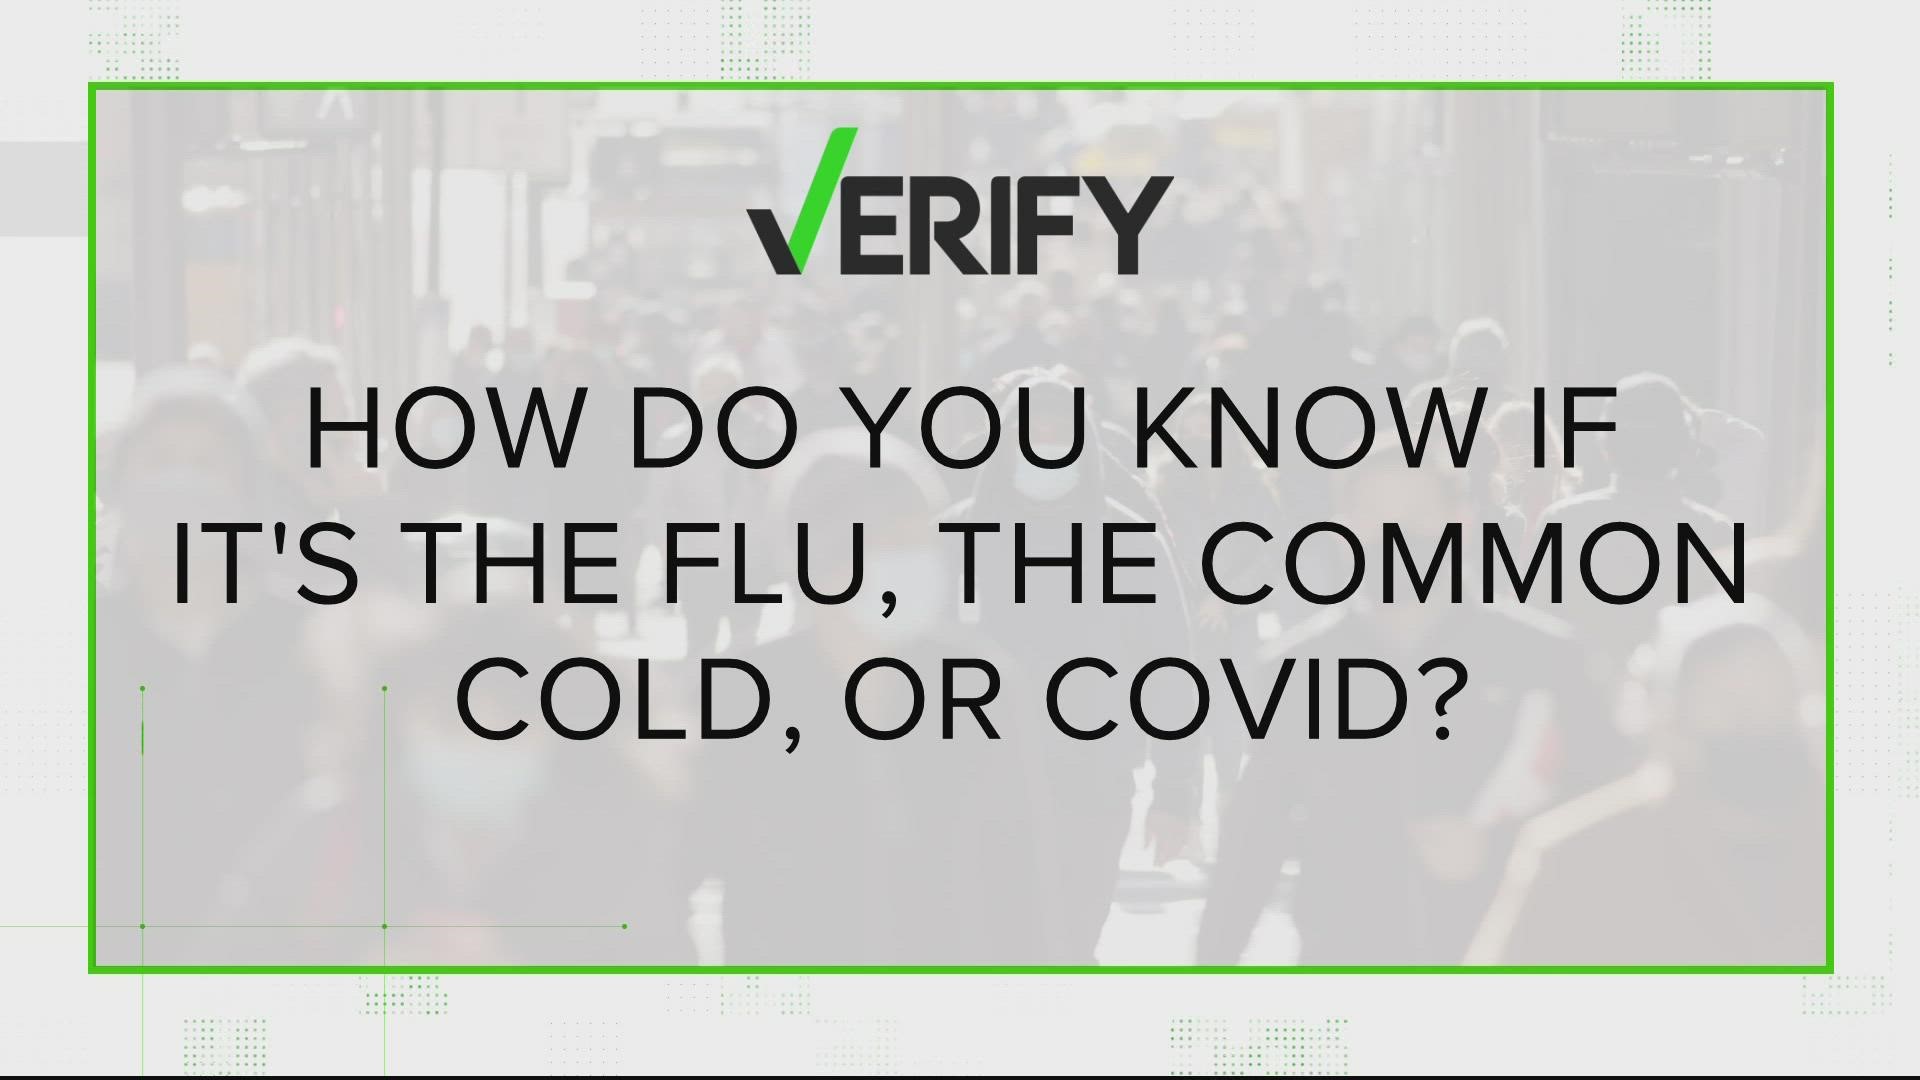 Since many of the symptoms for COVID are similar to the flu or the common cold, experts say the only way to truly know if you have COVID is to get tested.